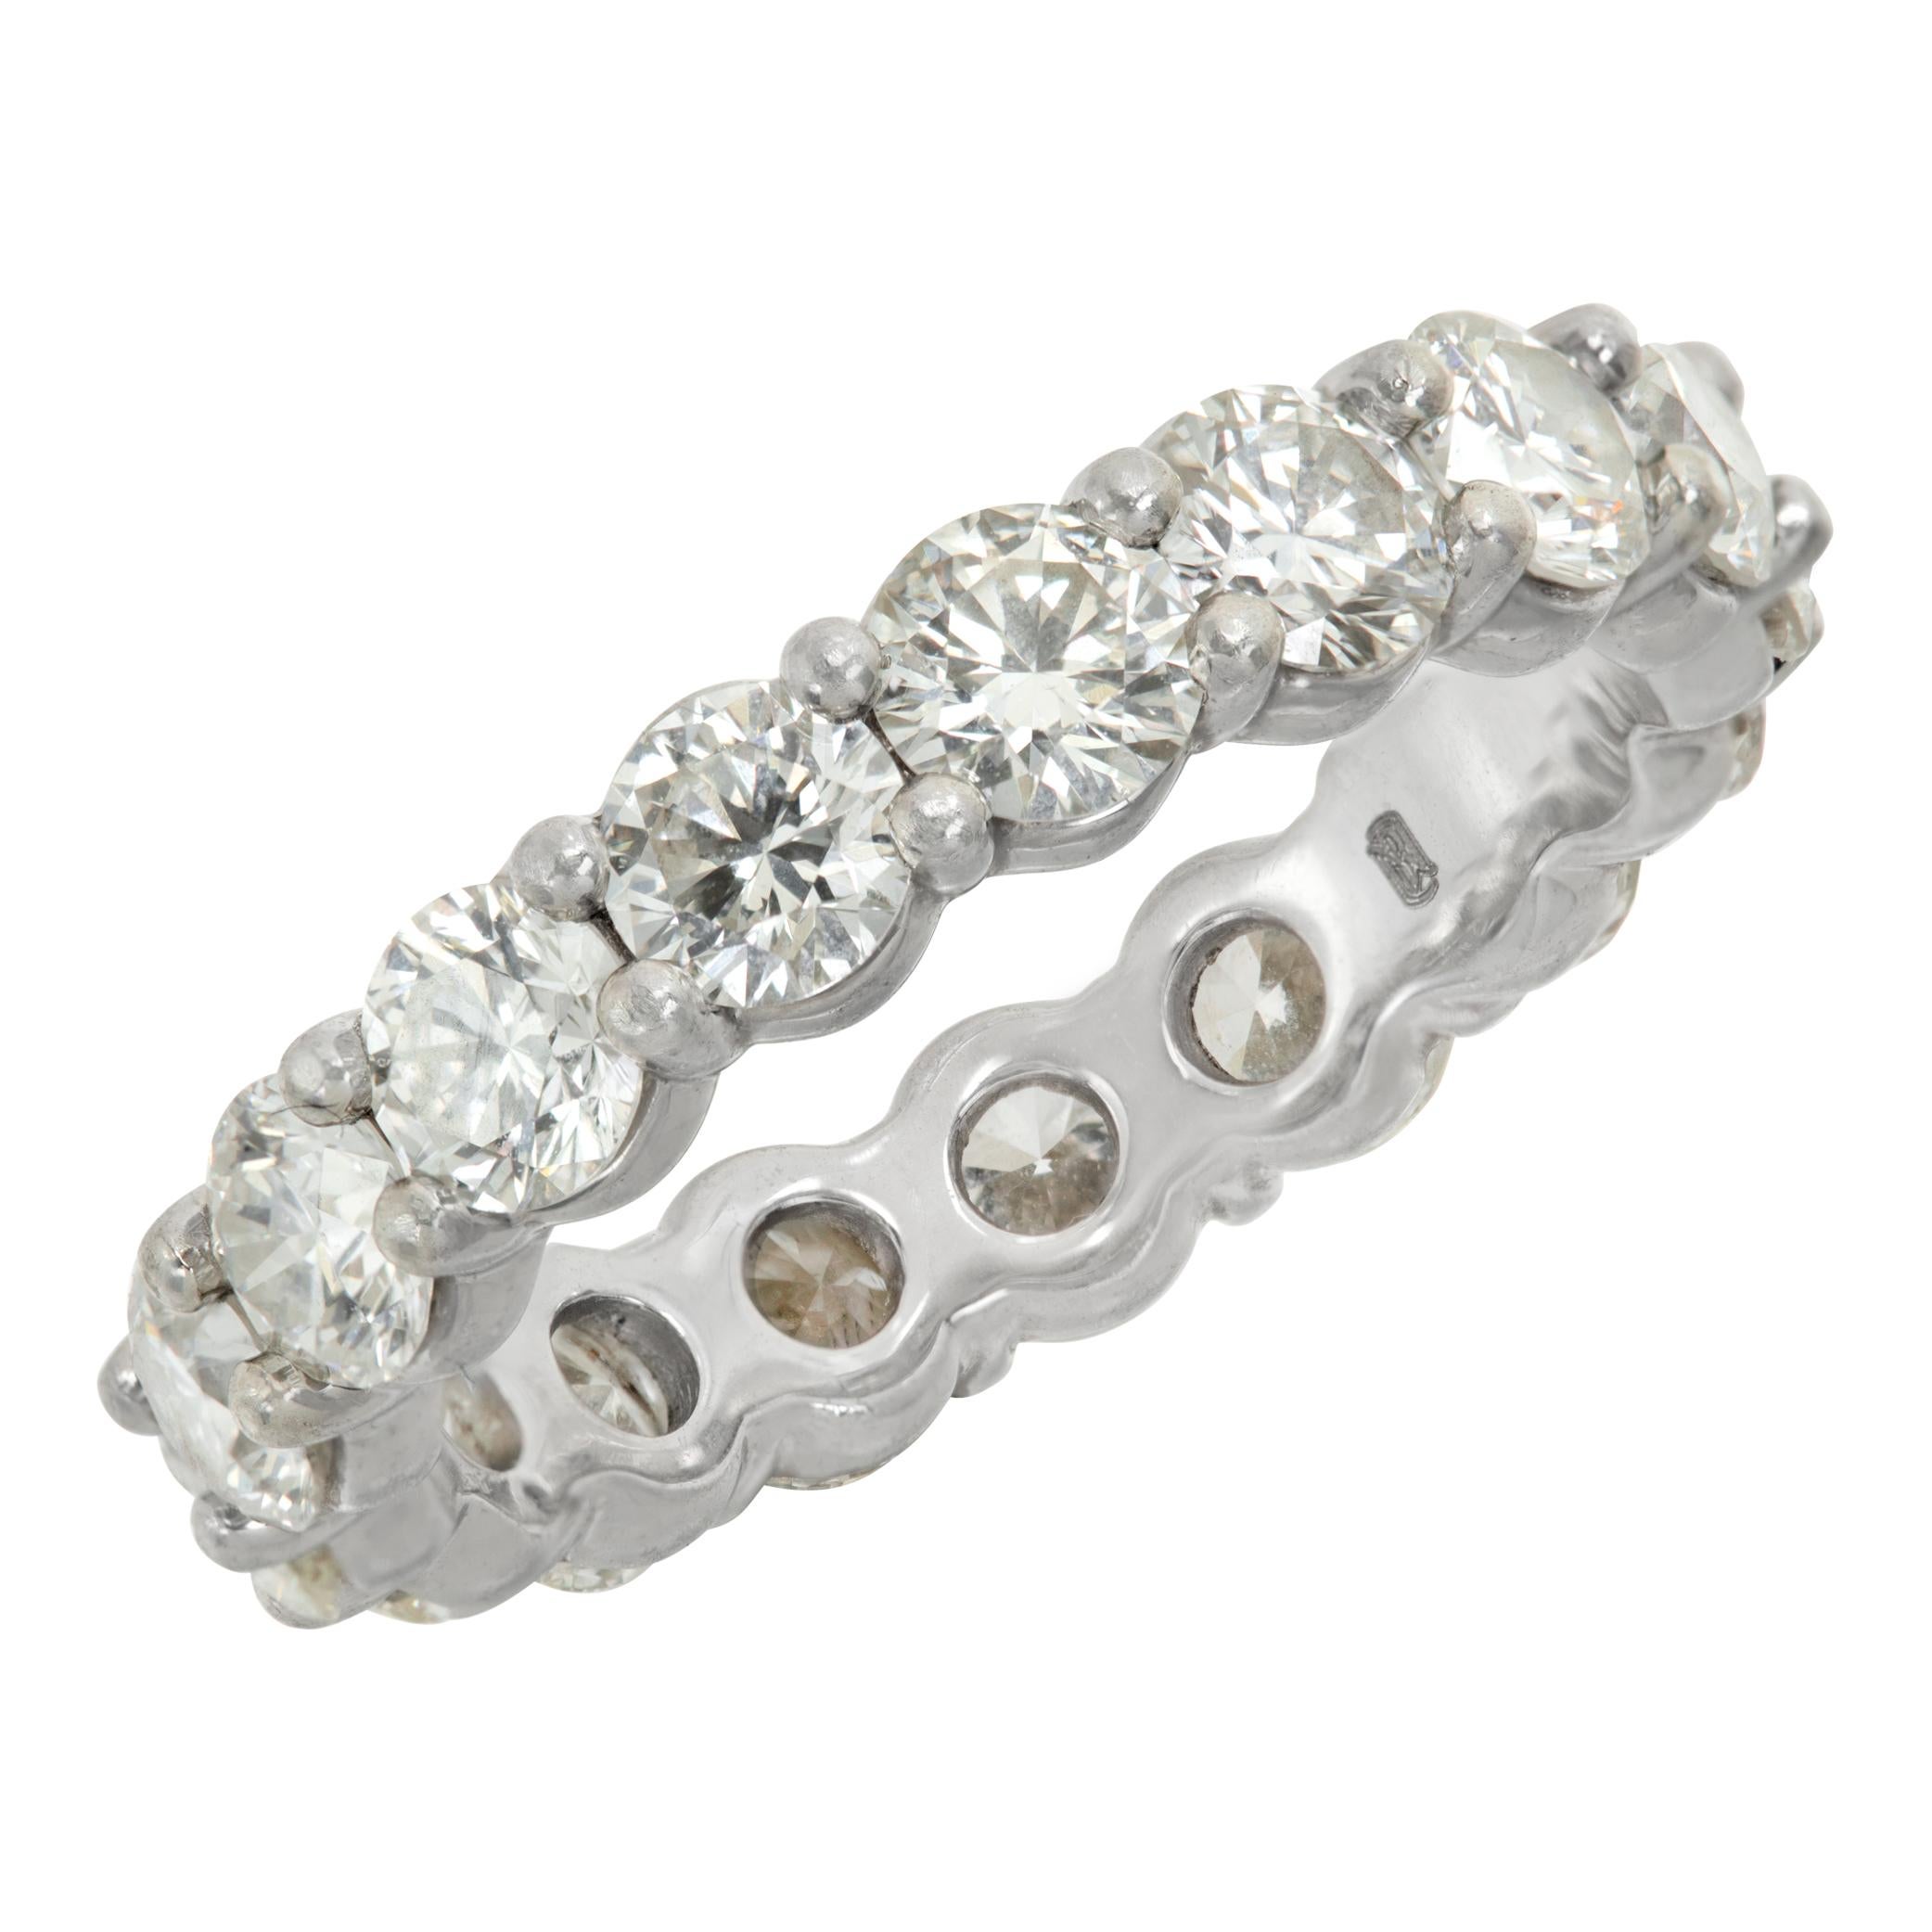 Diamond platinum eternity band In Excellent Condition For Sale In Surfside, FL